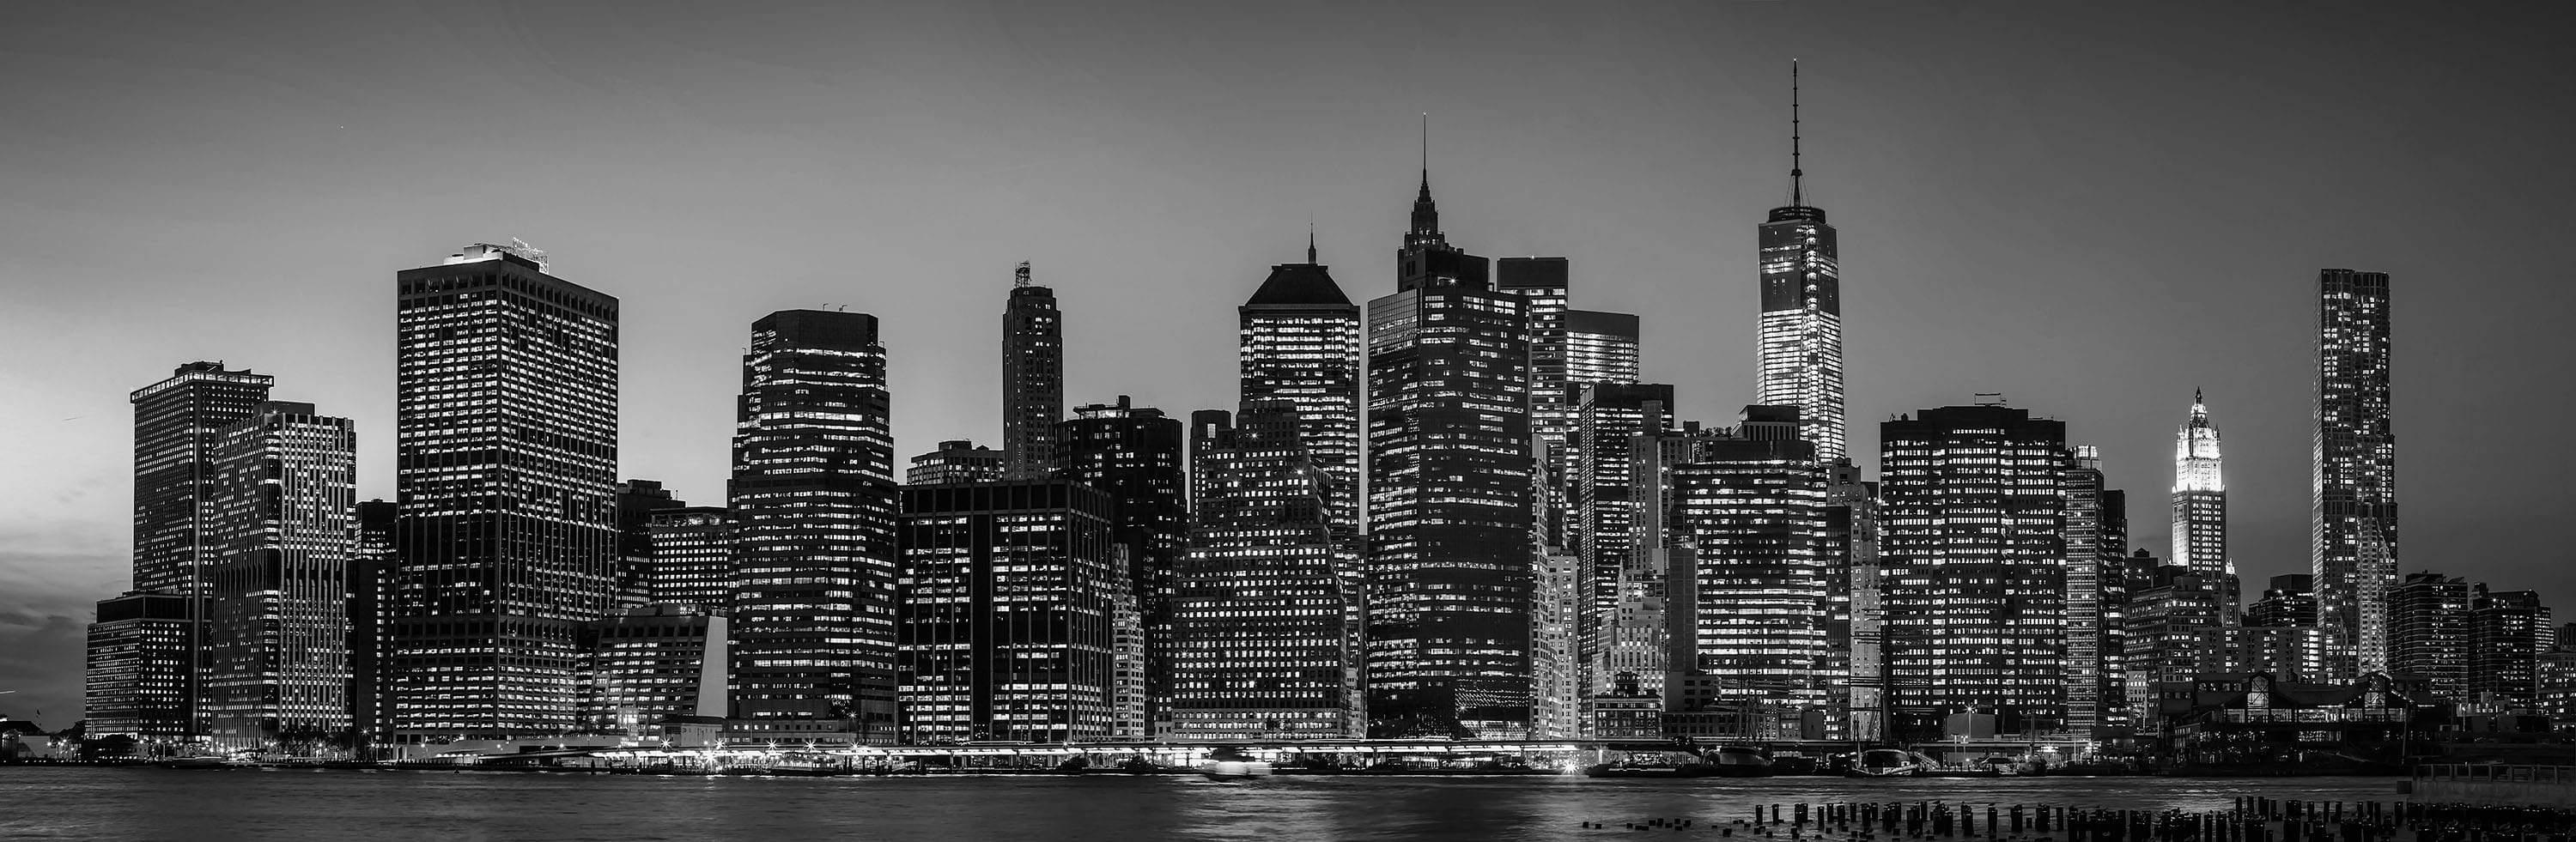 Black and White Chicago Skyline at night wallpaper